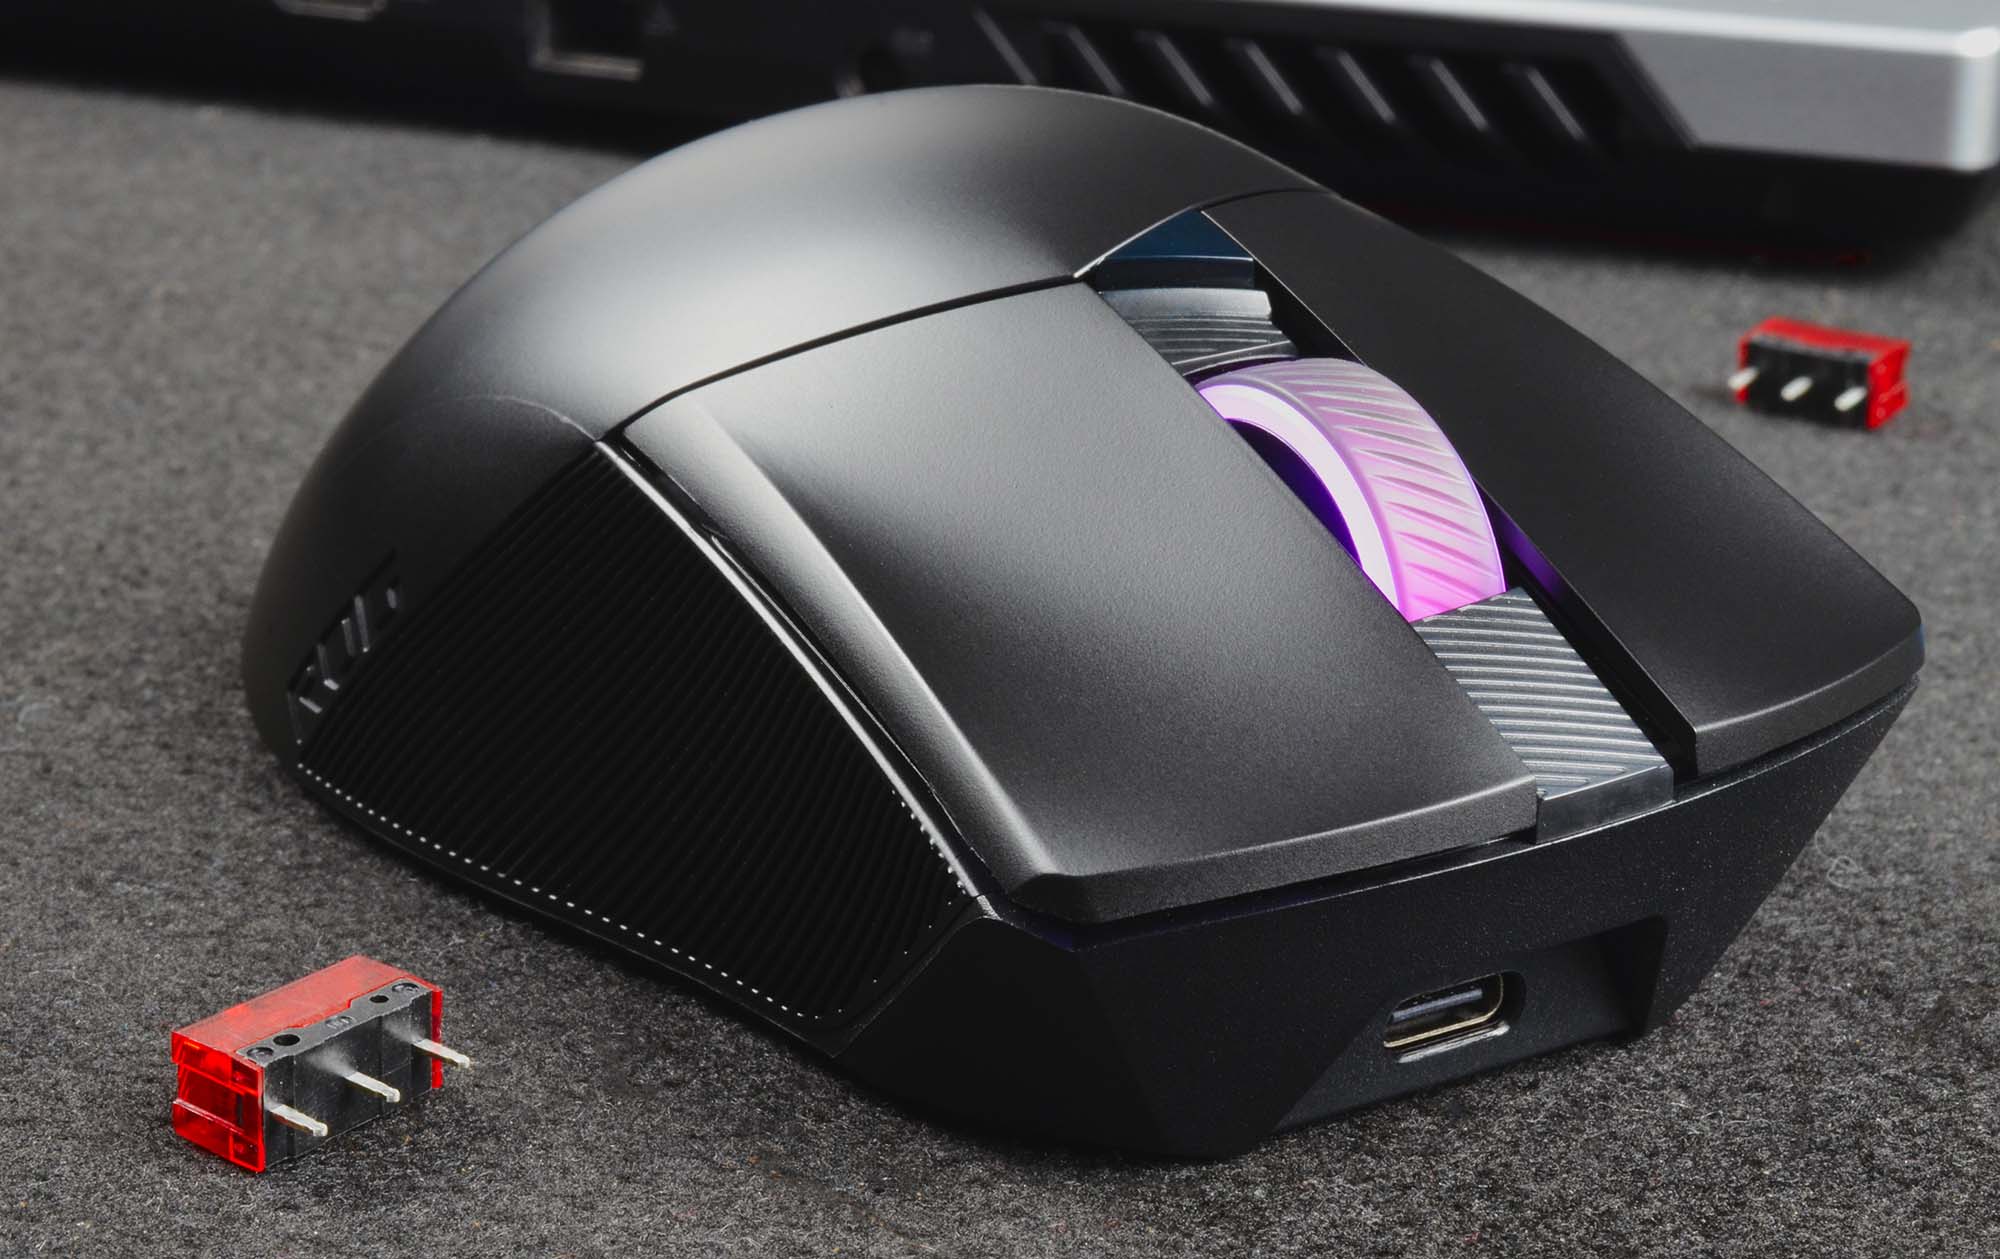 HOW TO REPLACE THE SWITCHES IN YOUR ROG GLADIUS III GAMING MOUSE